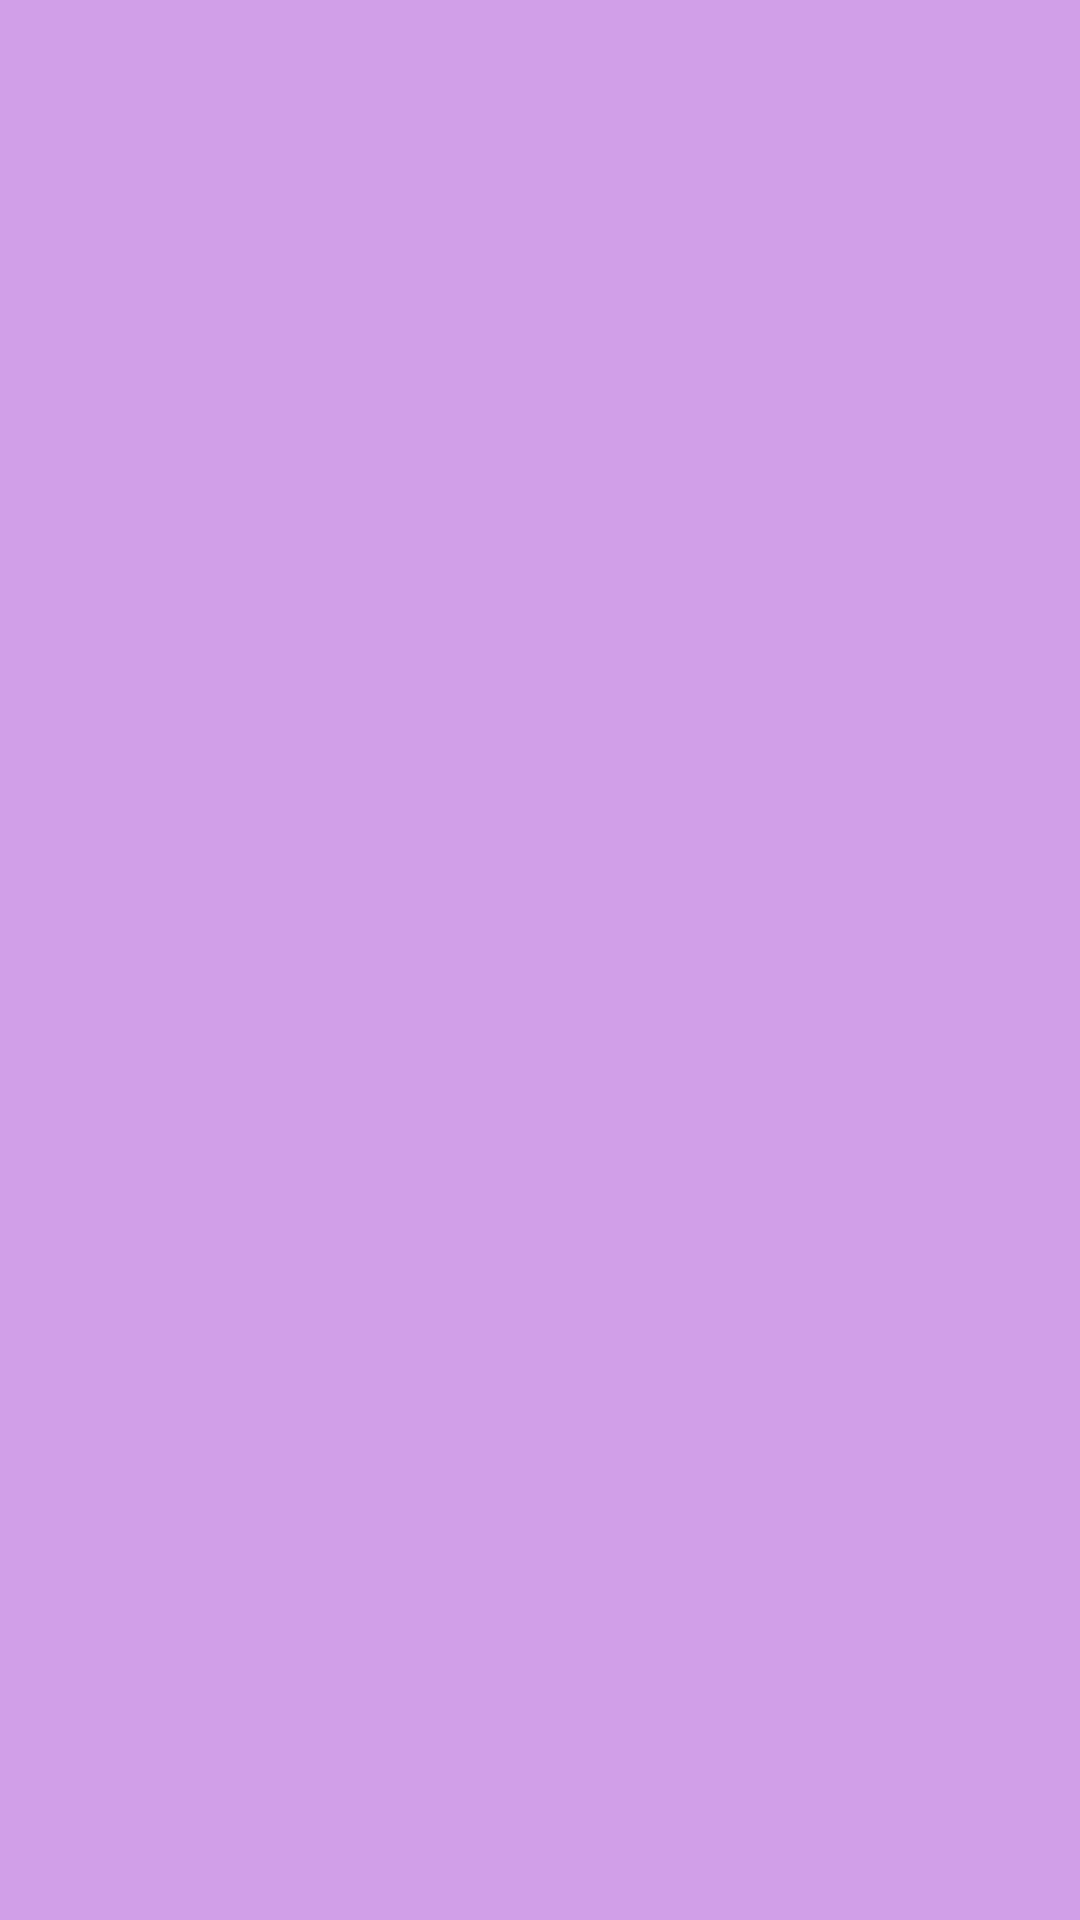 1080x1920 Bright Ube Solid Color Background